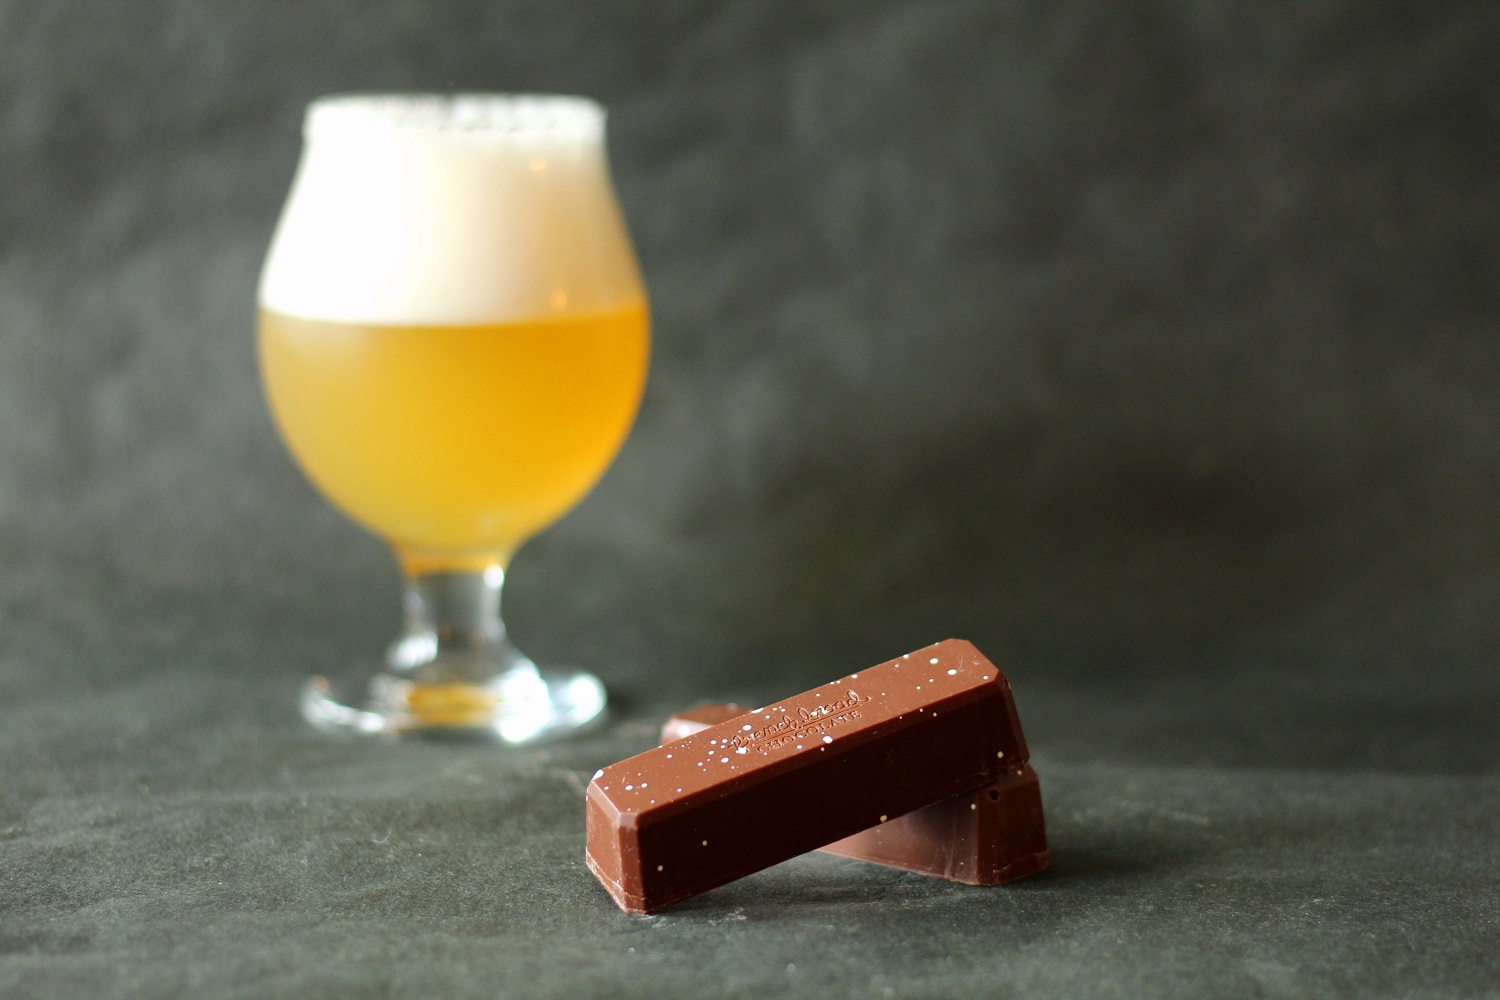 Beer and Chocolate